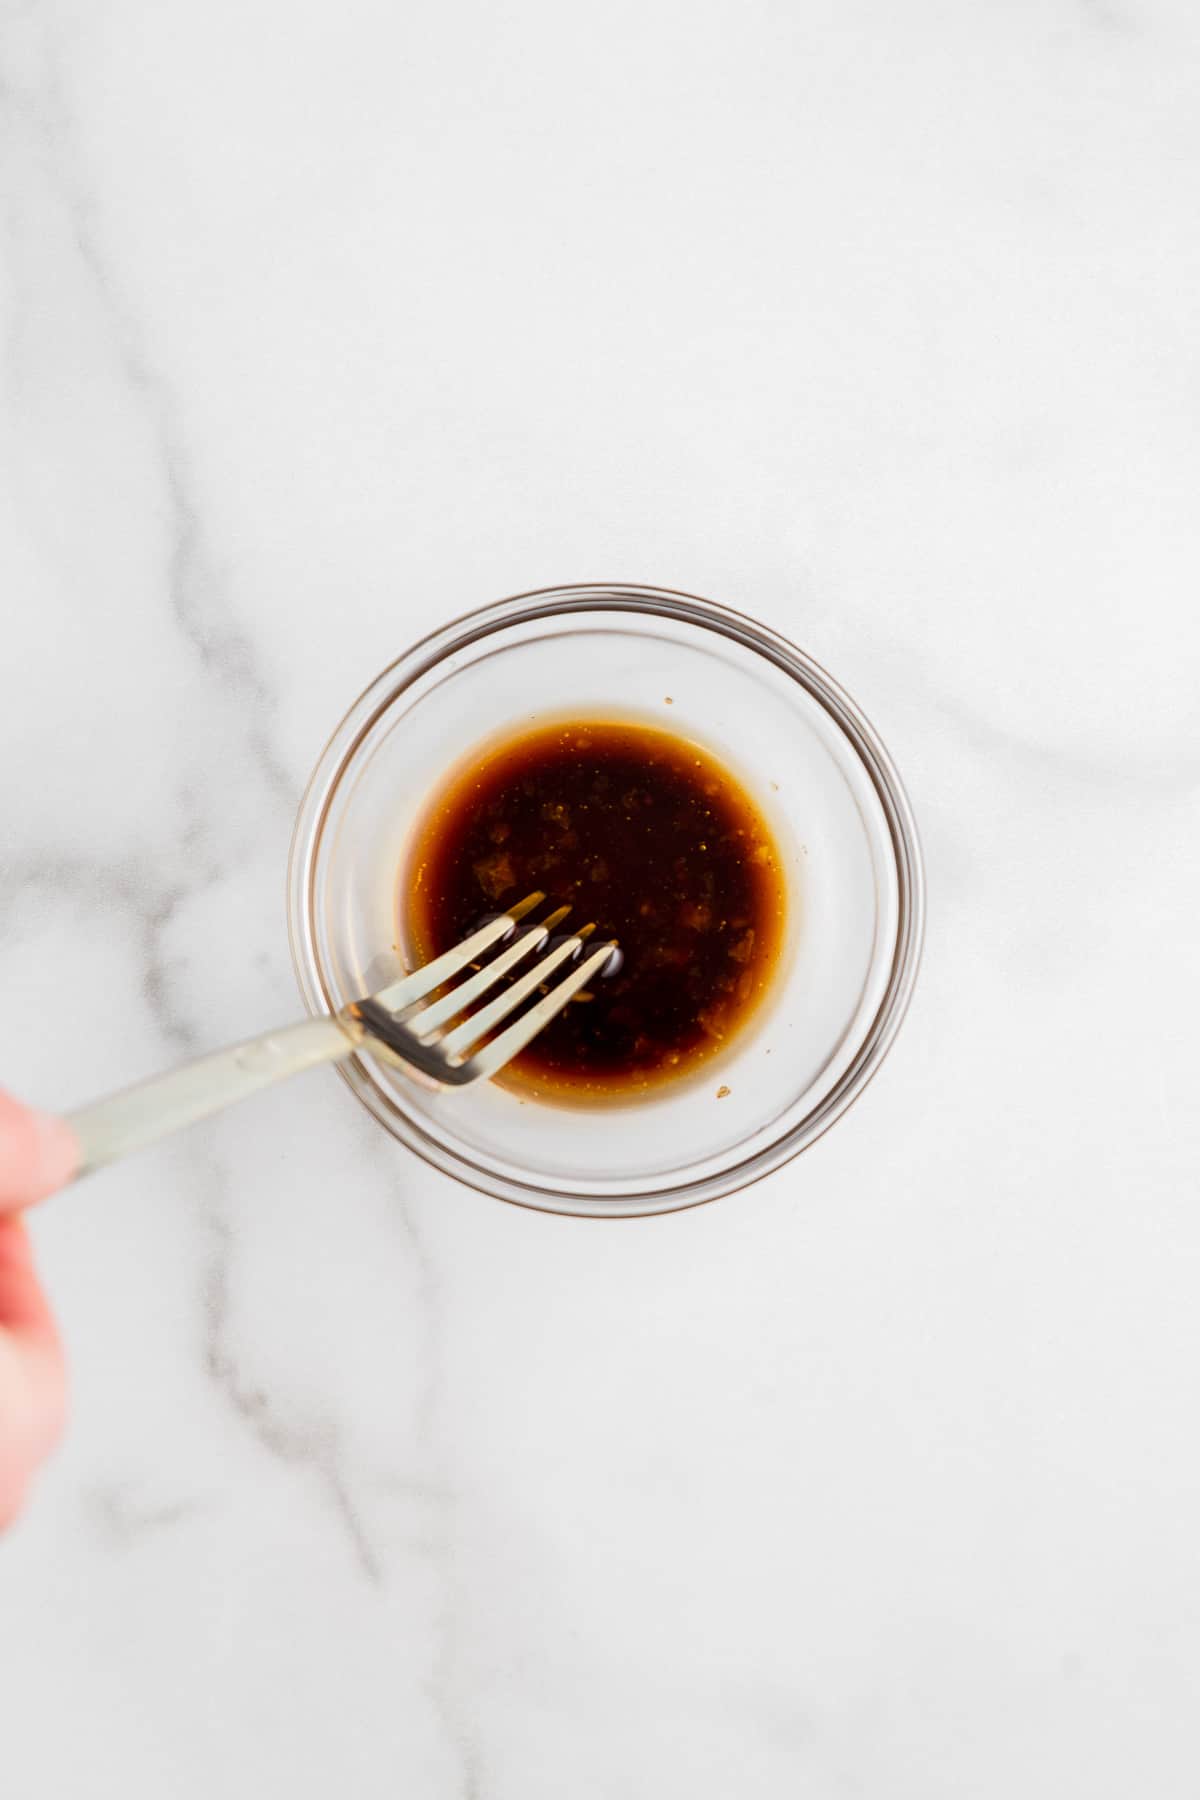 Mixing balsamic vinaigrette in a small bowl.